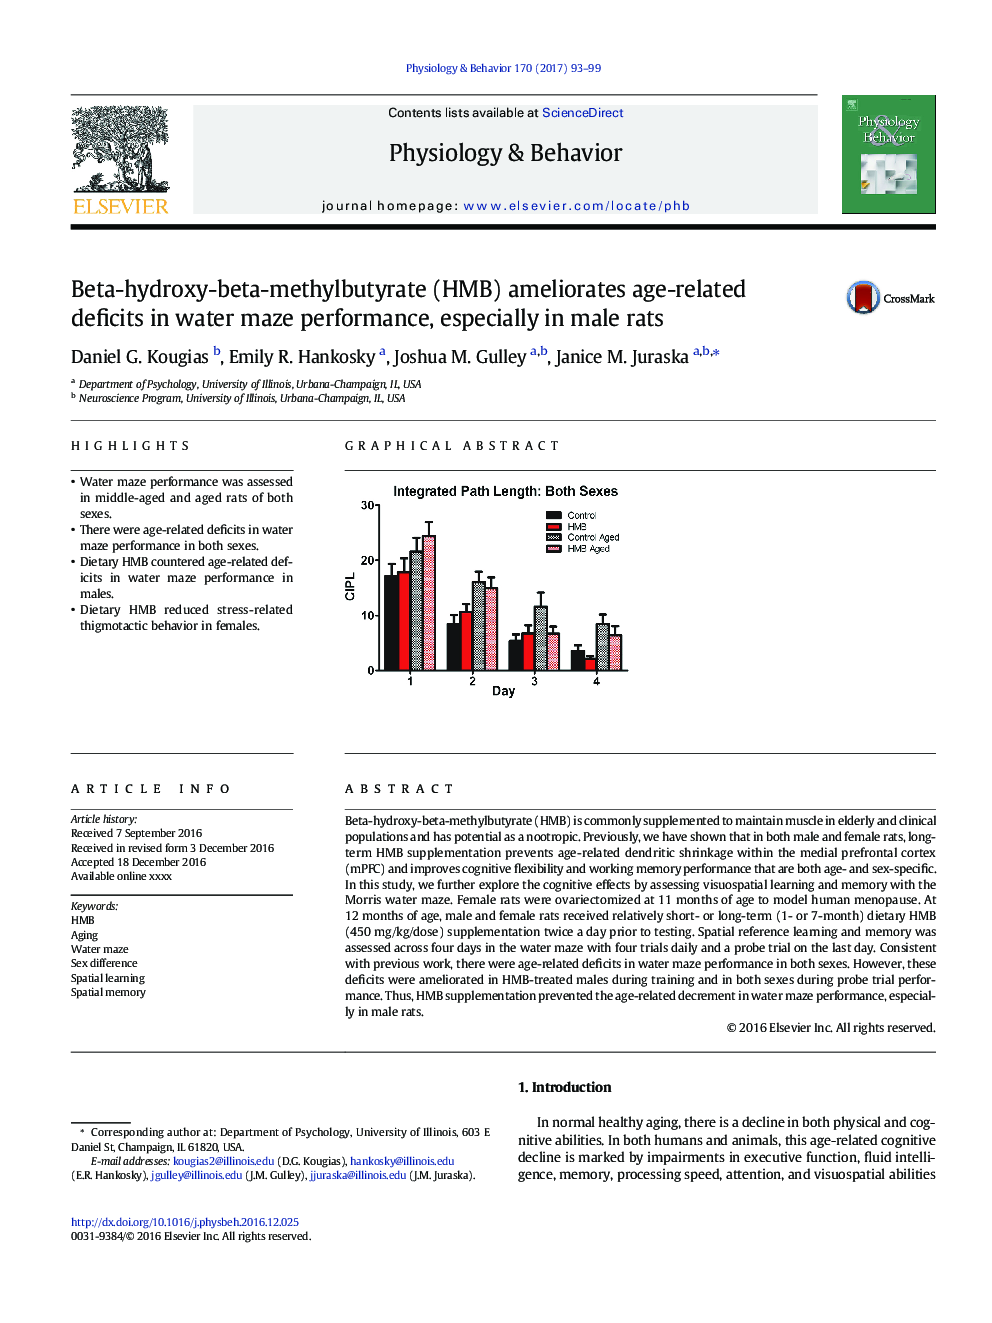 Beta-hydroxy-beta-methylbutyrate (HMB) ameliorates age-related deficits in water maze performance, especially in male rats